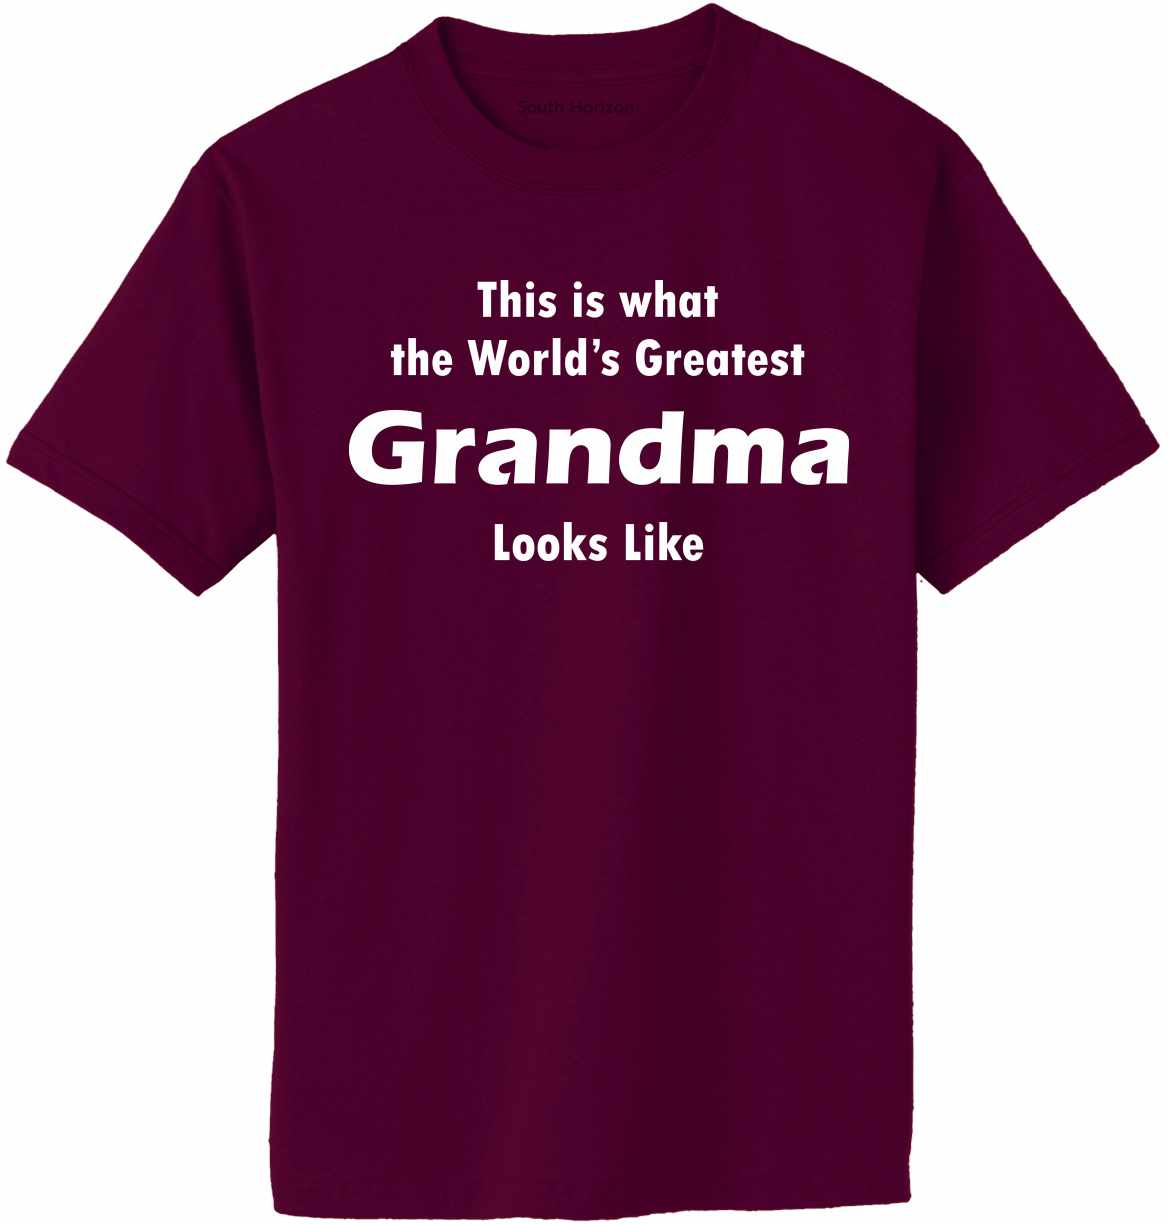 This is what the World's Greatest Grandma Looks Like Adult T-Shirt (#761-1)